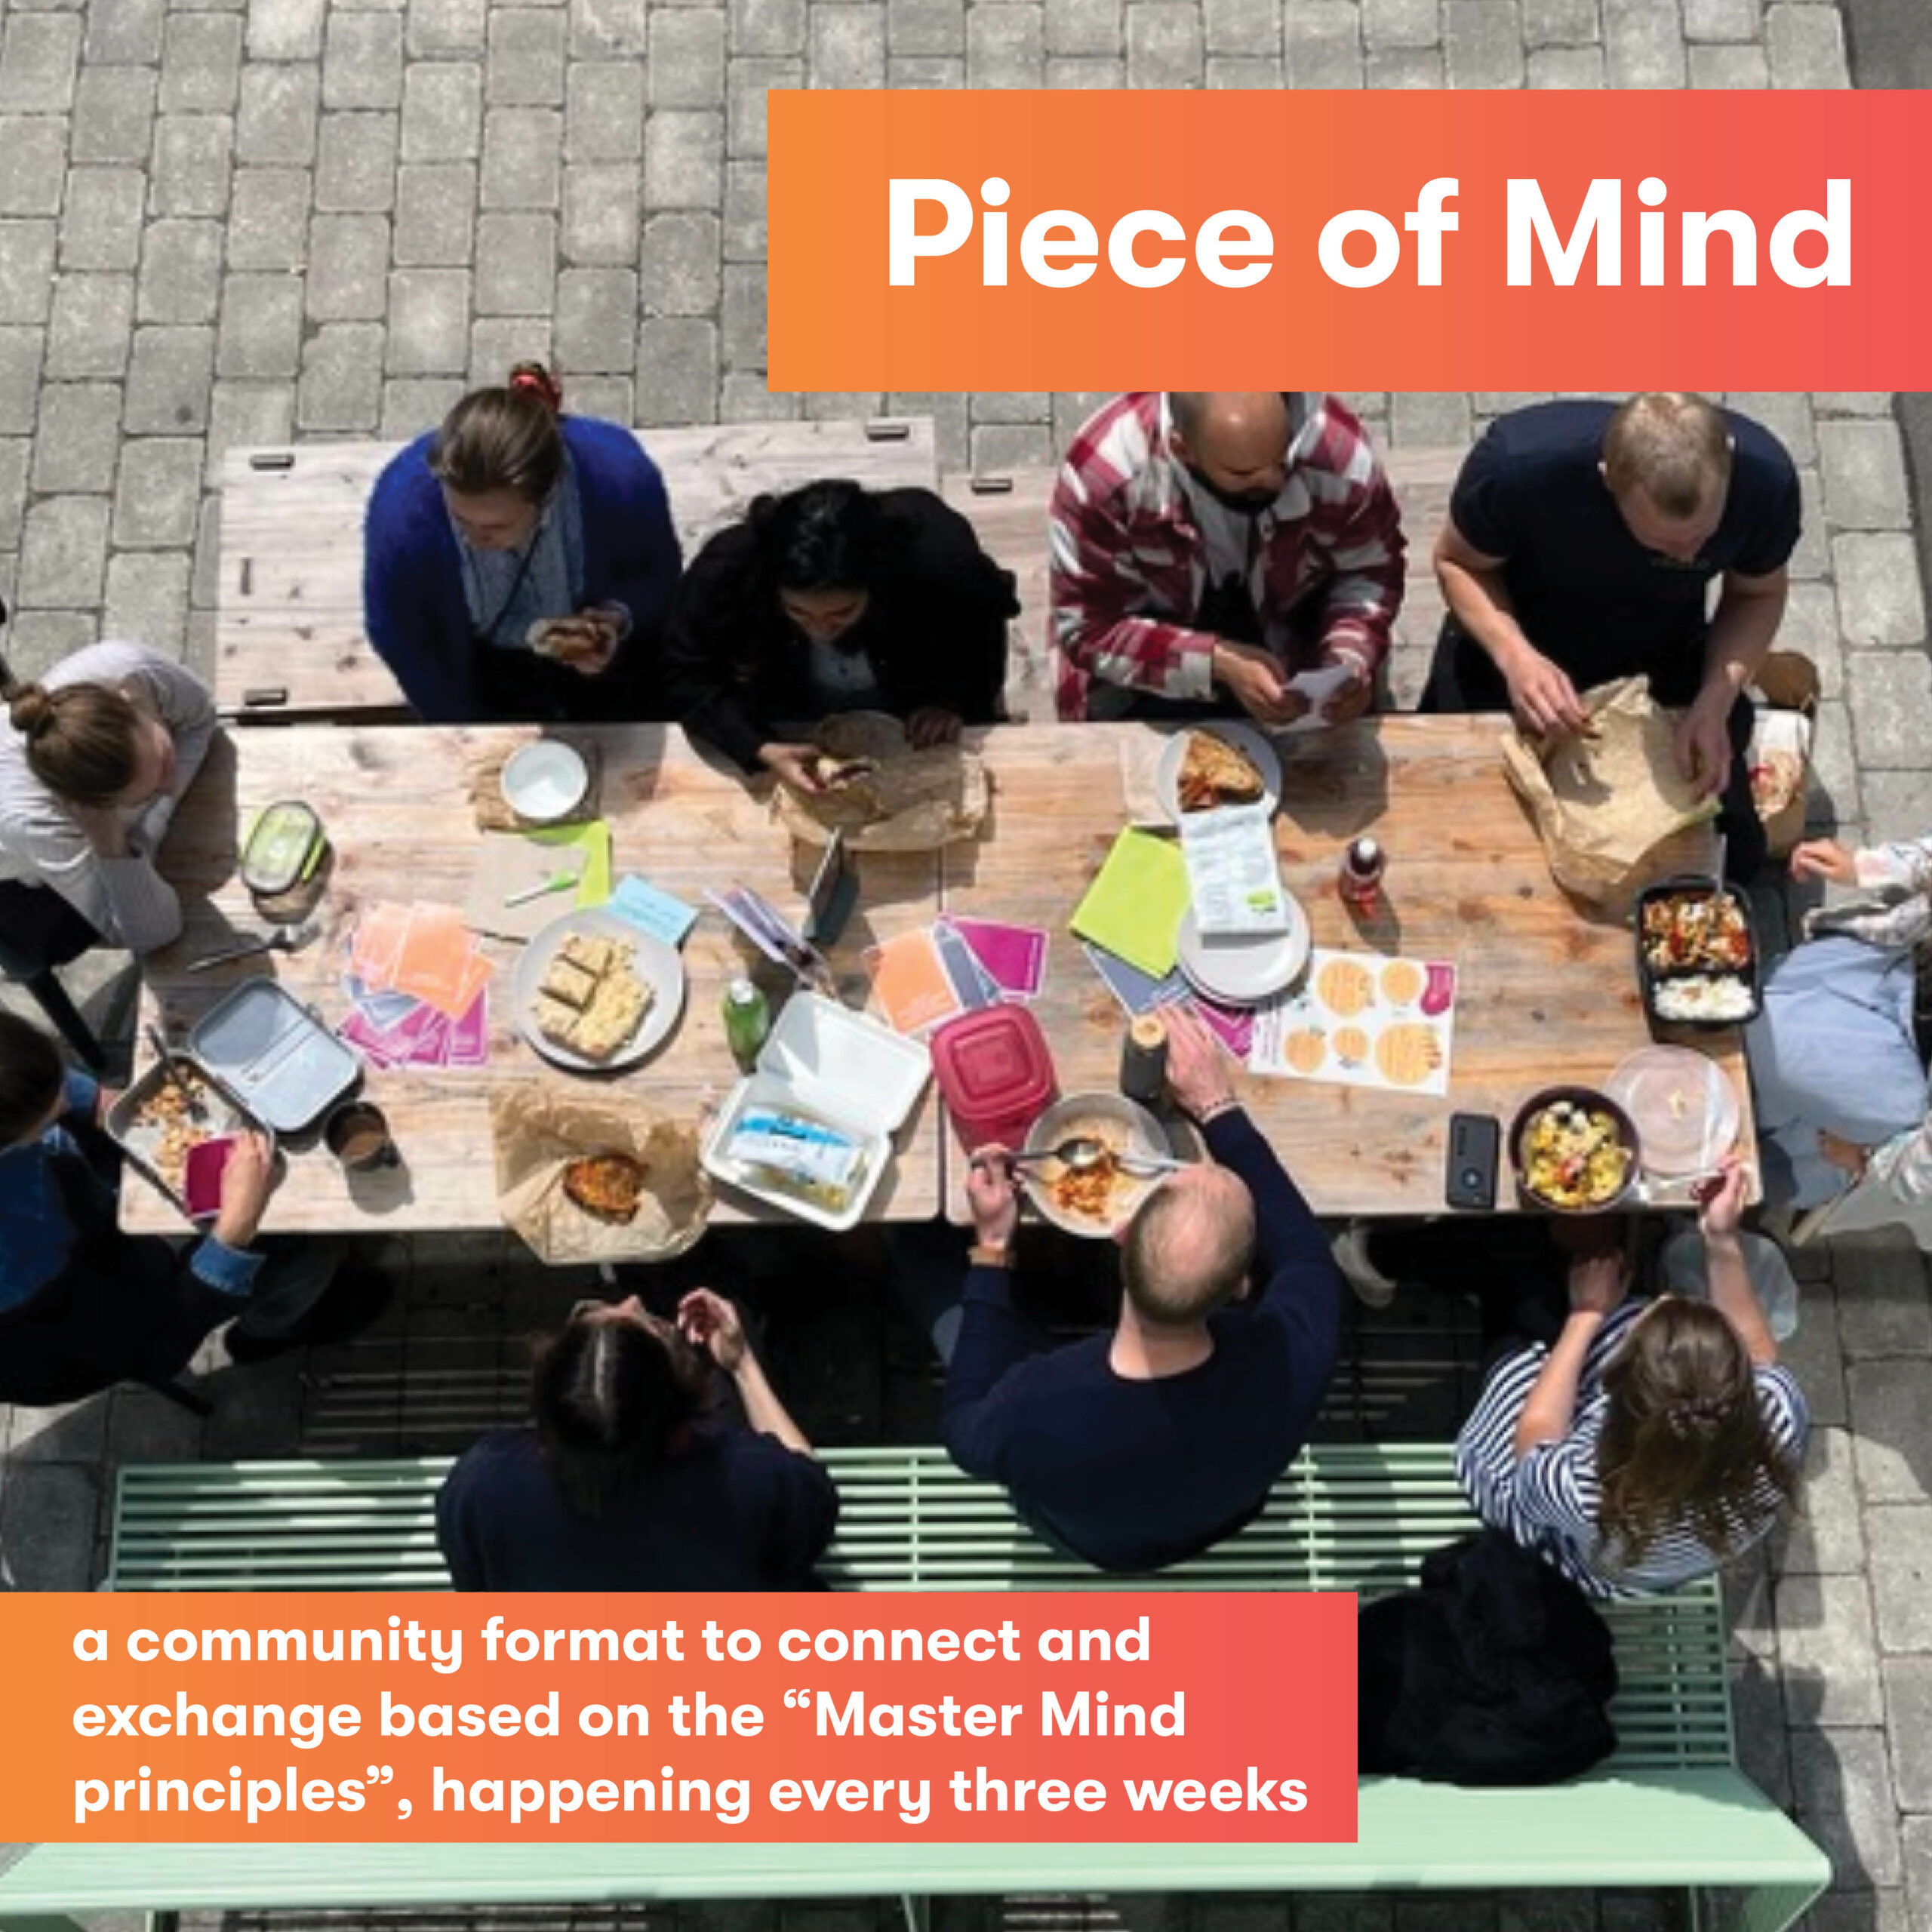 Piece of Mind. A community format to connect and exchange based on the "Master Mind Principles", happening every three weeks.